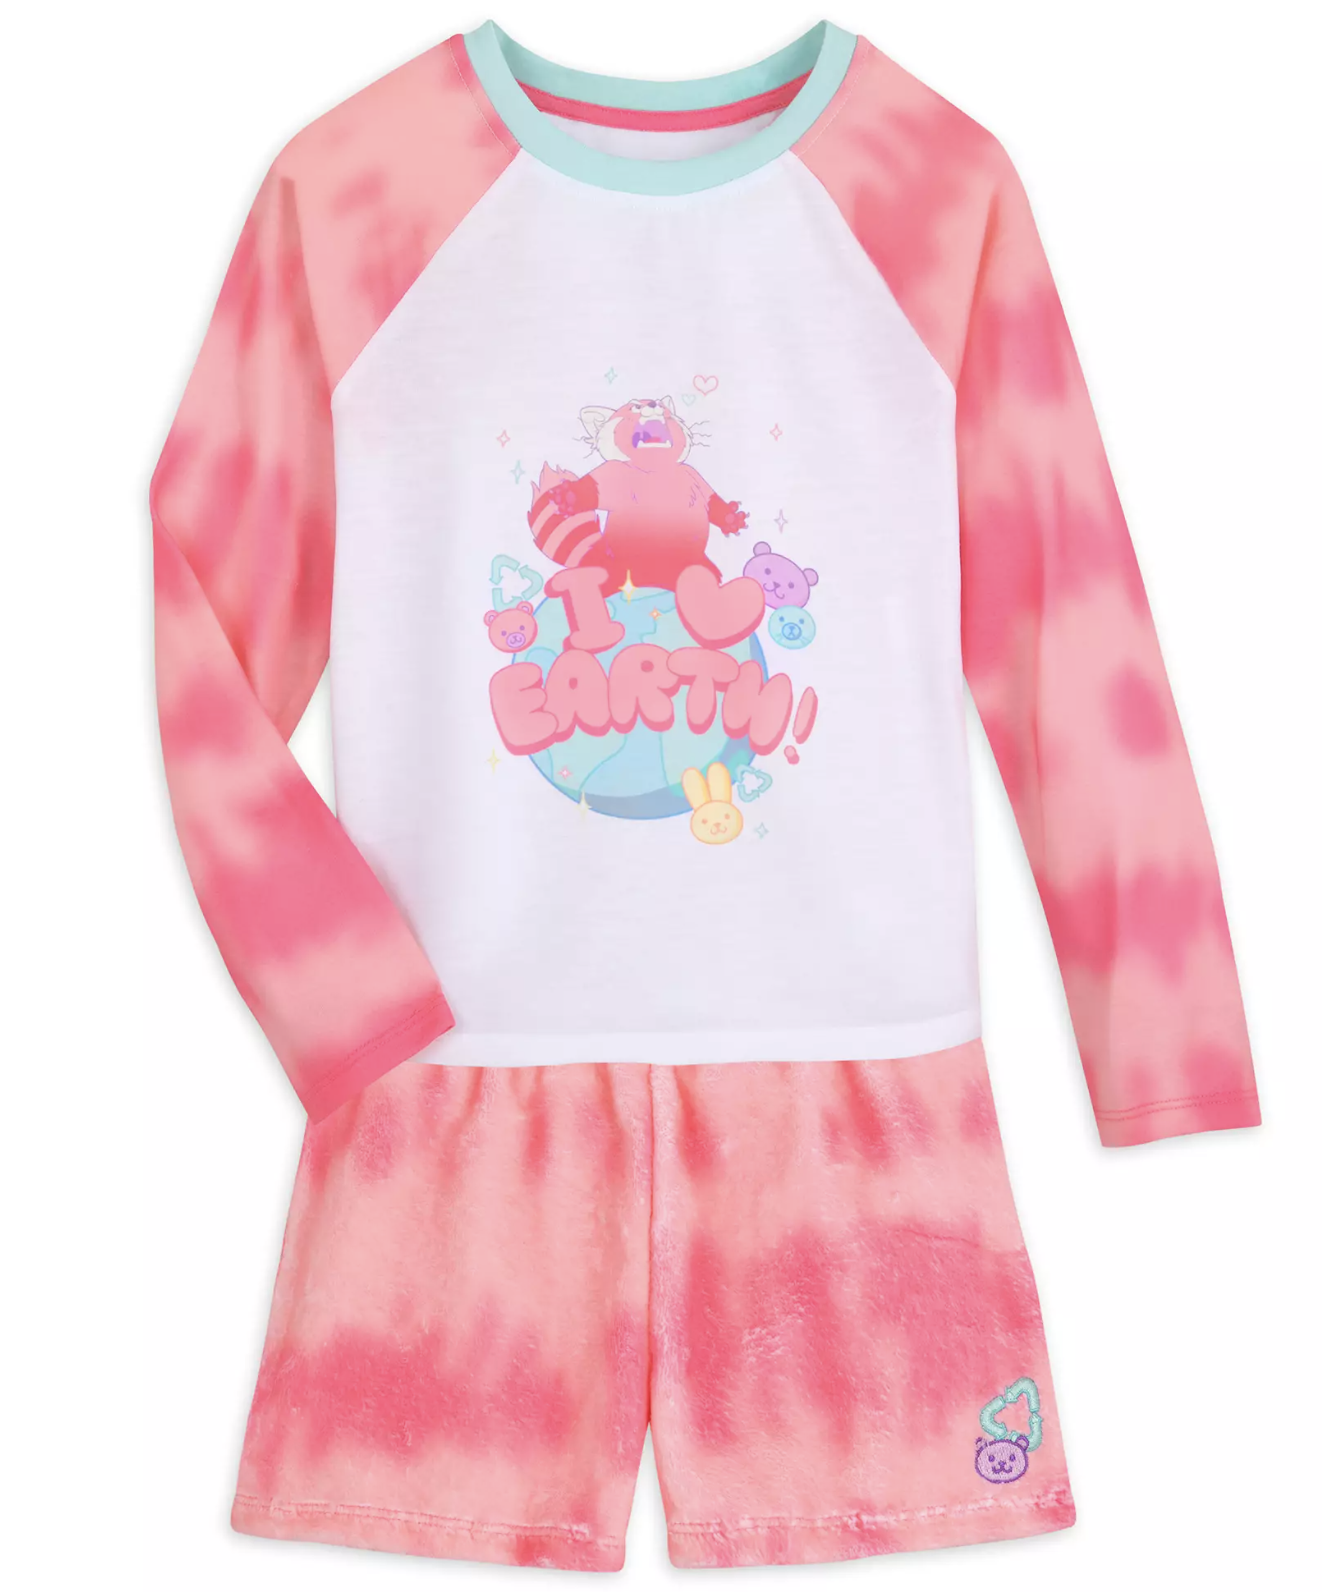 A pajama set with a long sleeve shirt and shorts with an image of Panda Mei